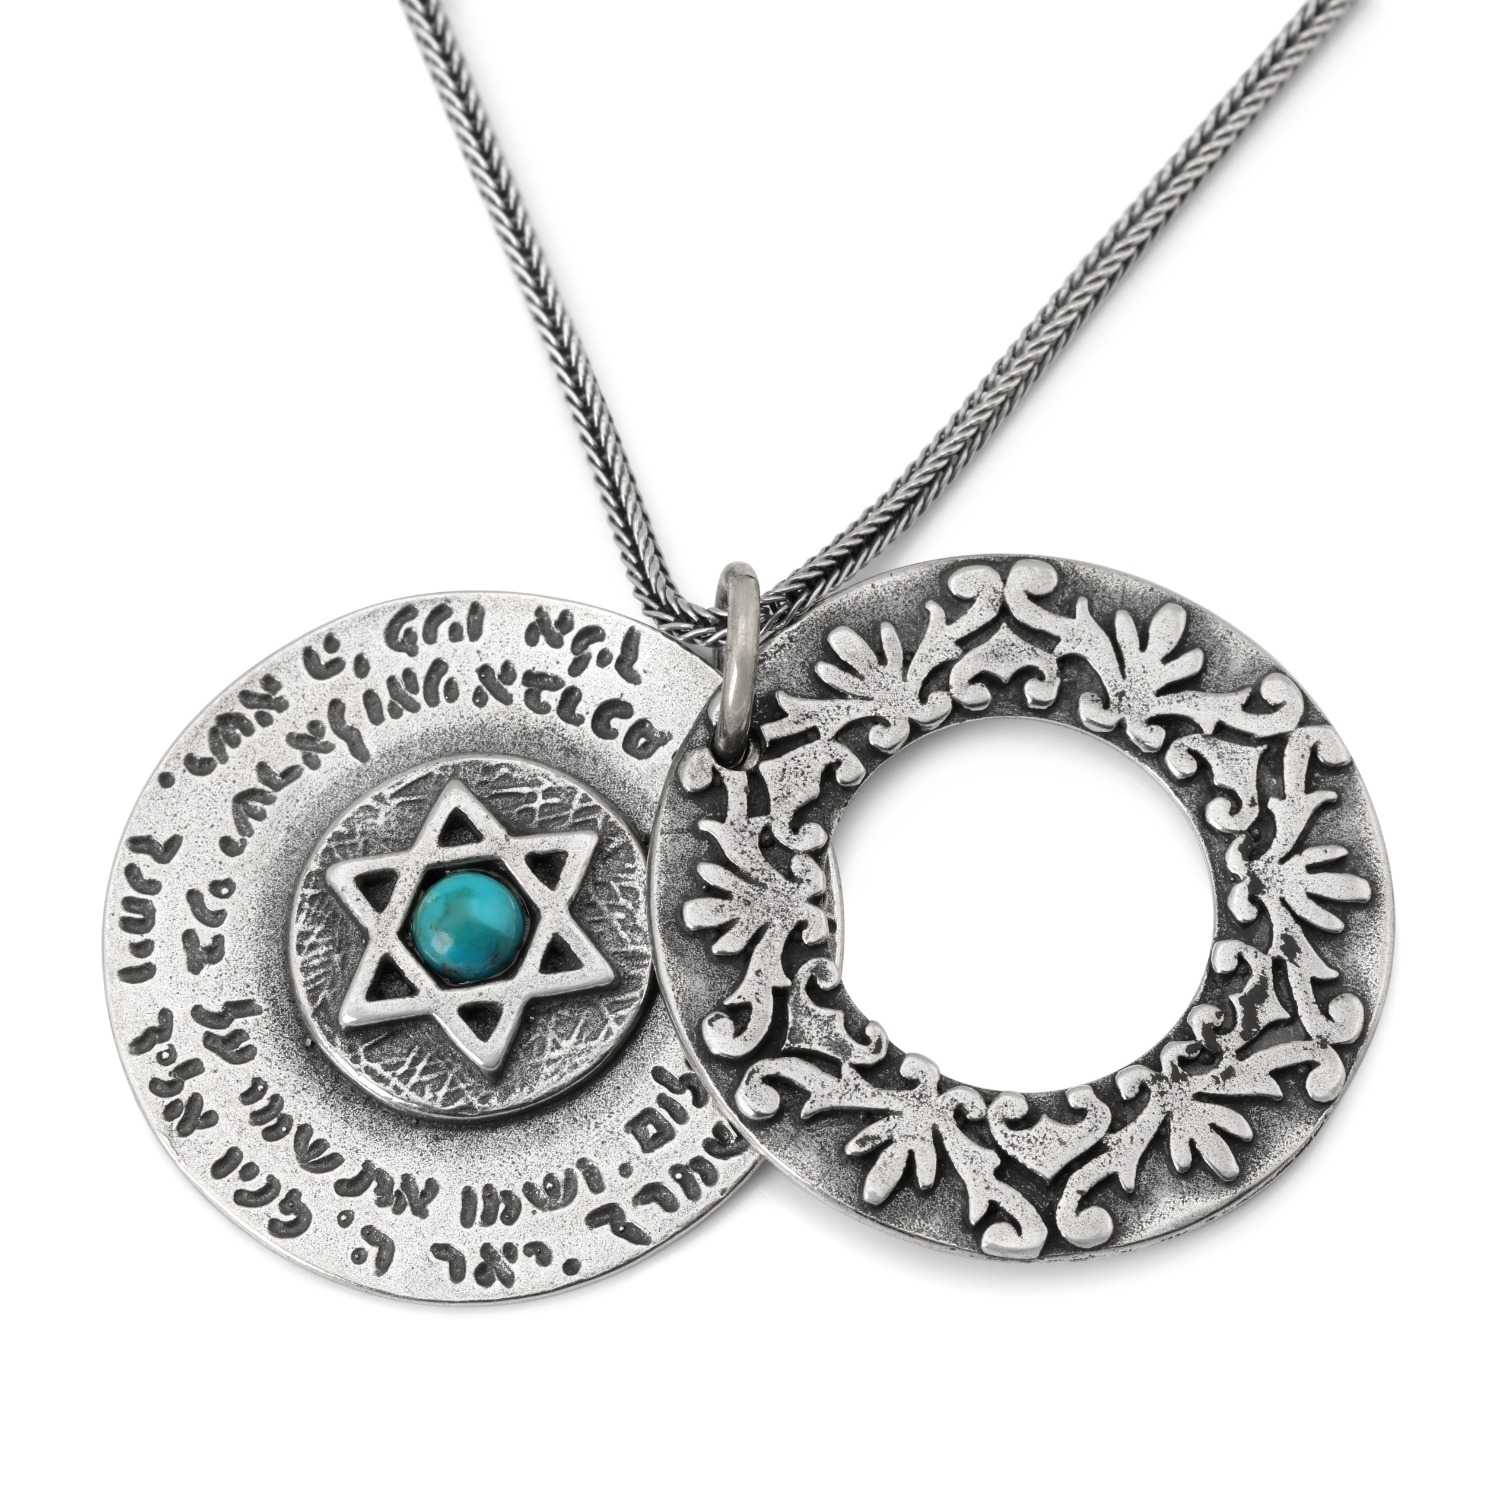 Ana Bekoach, Traveler's & Priestly Blessings: Double Disk Star of David Pendant - 1